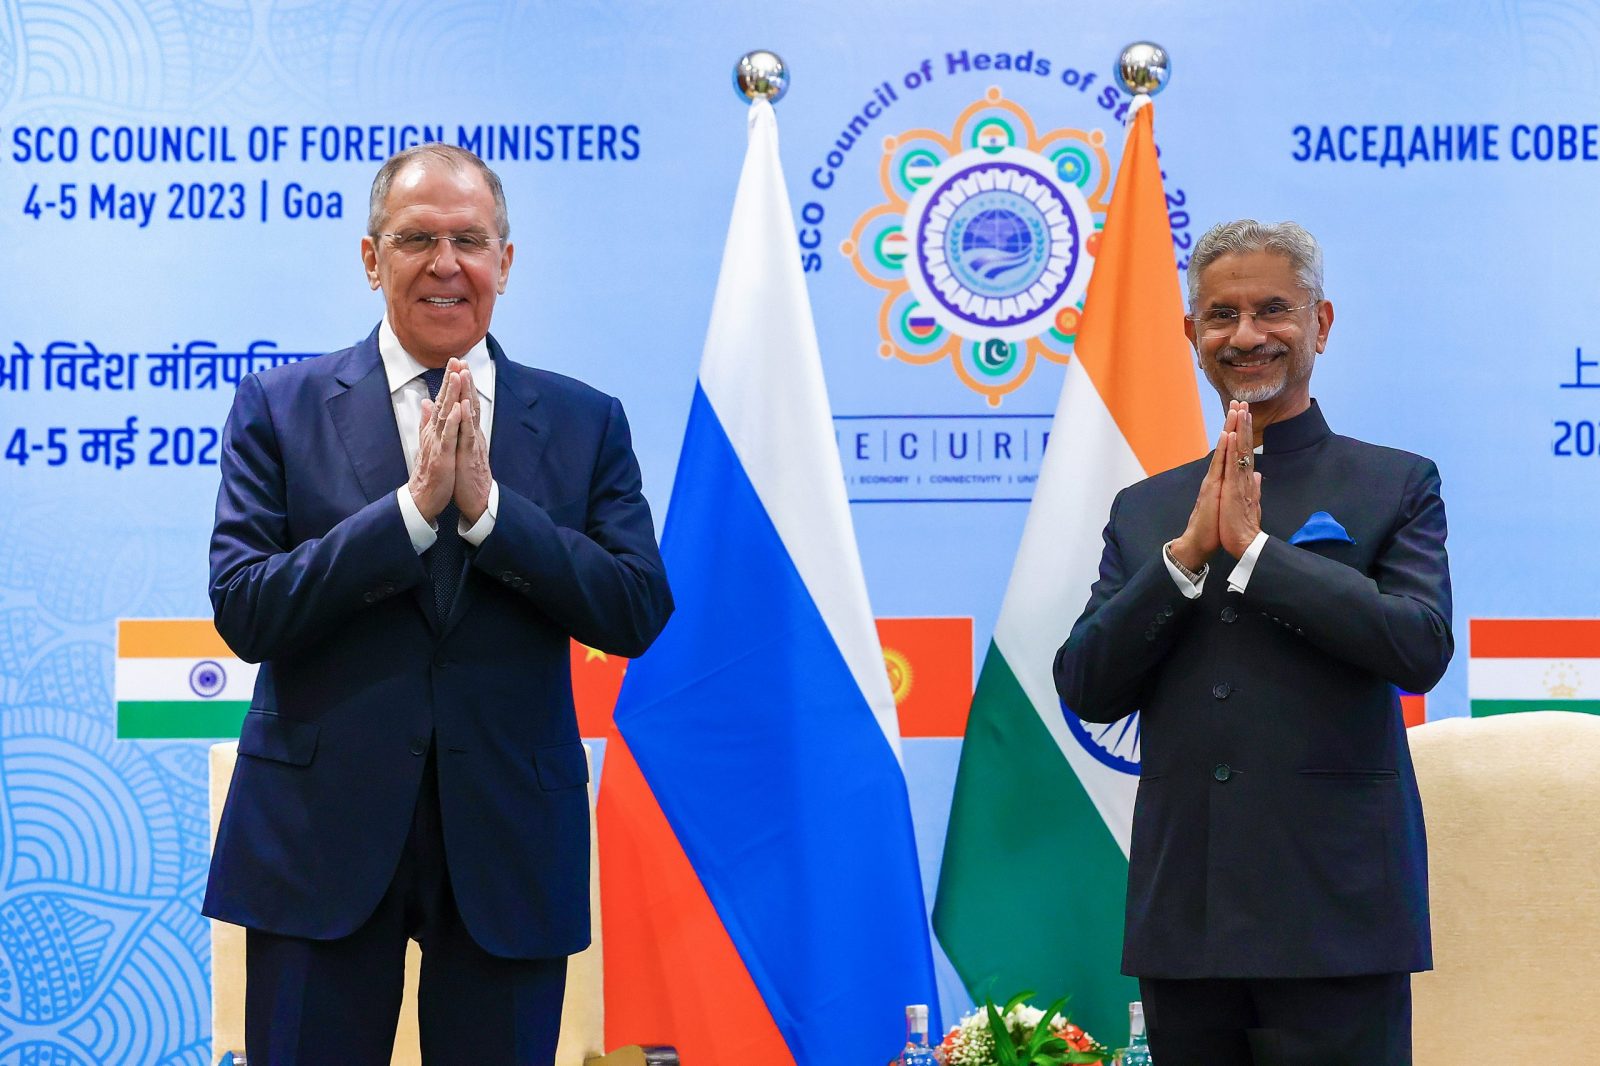 epa10608854 A handout photo made available by the Russian Foreign Ministry press service shows Russian Foreign Minister Sergey Lavrov (L) with India's Foreign Minister S. Jaishankar (R) during the Shanghai Cooperation Organization (SCO) foreign ministers meeting in Goa, India, 04 May 2023. India is hosting this year's SCO summit in Goa from 04 to 05 May 2023.  EPA/RUSSIAN FOREIGN MINISTRY PRESS SERVICE / HANDOUT  HANDOUT EDITORIAL USE ONLY/NO SALES